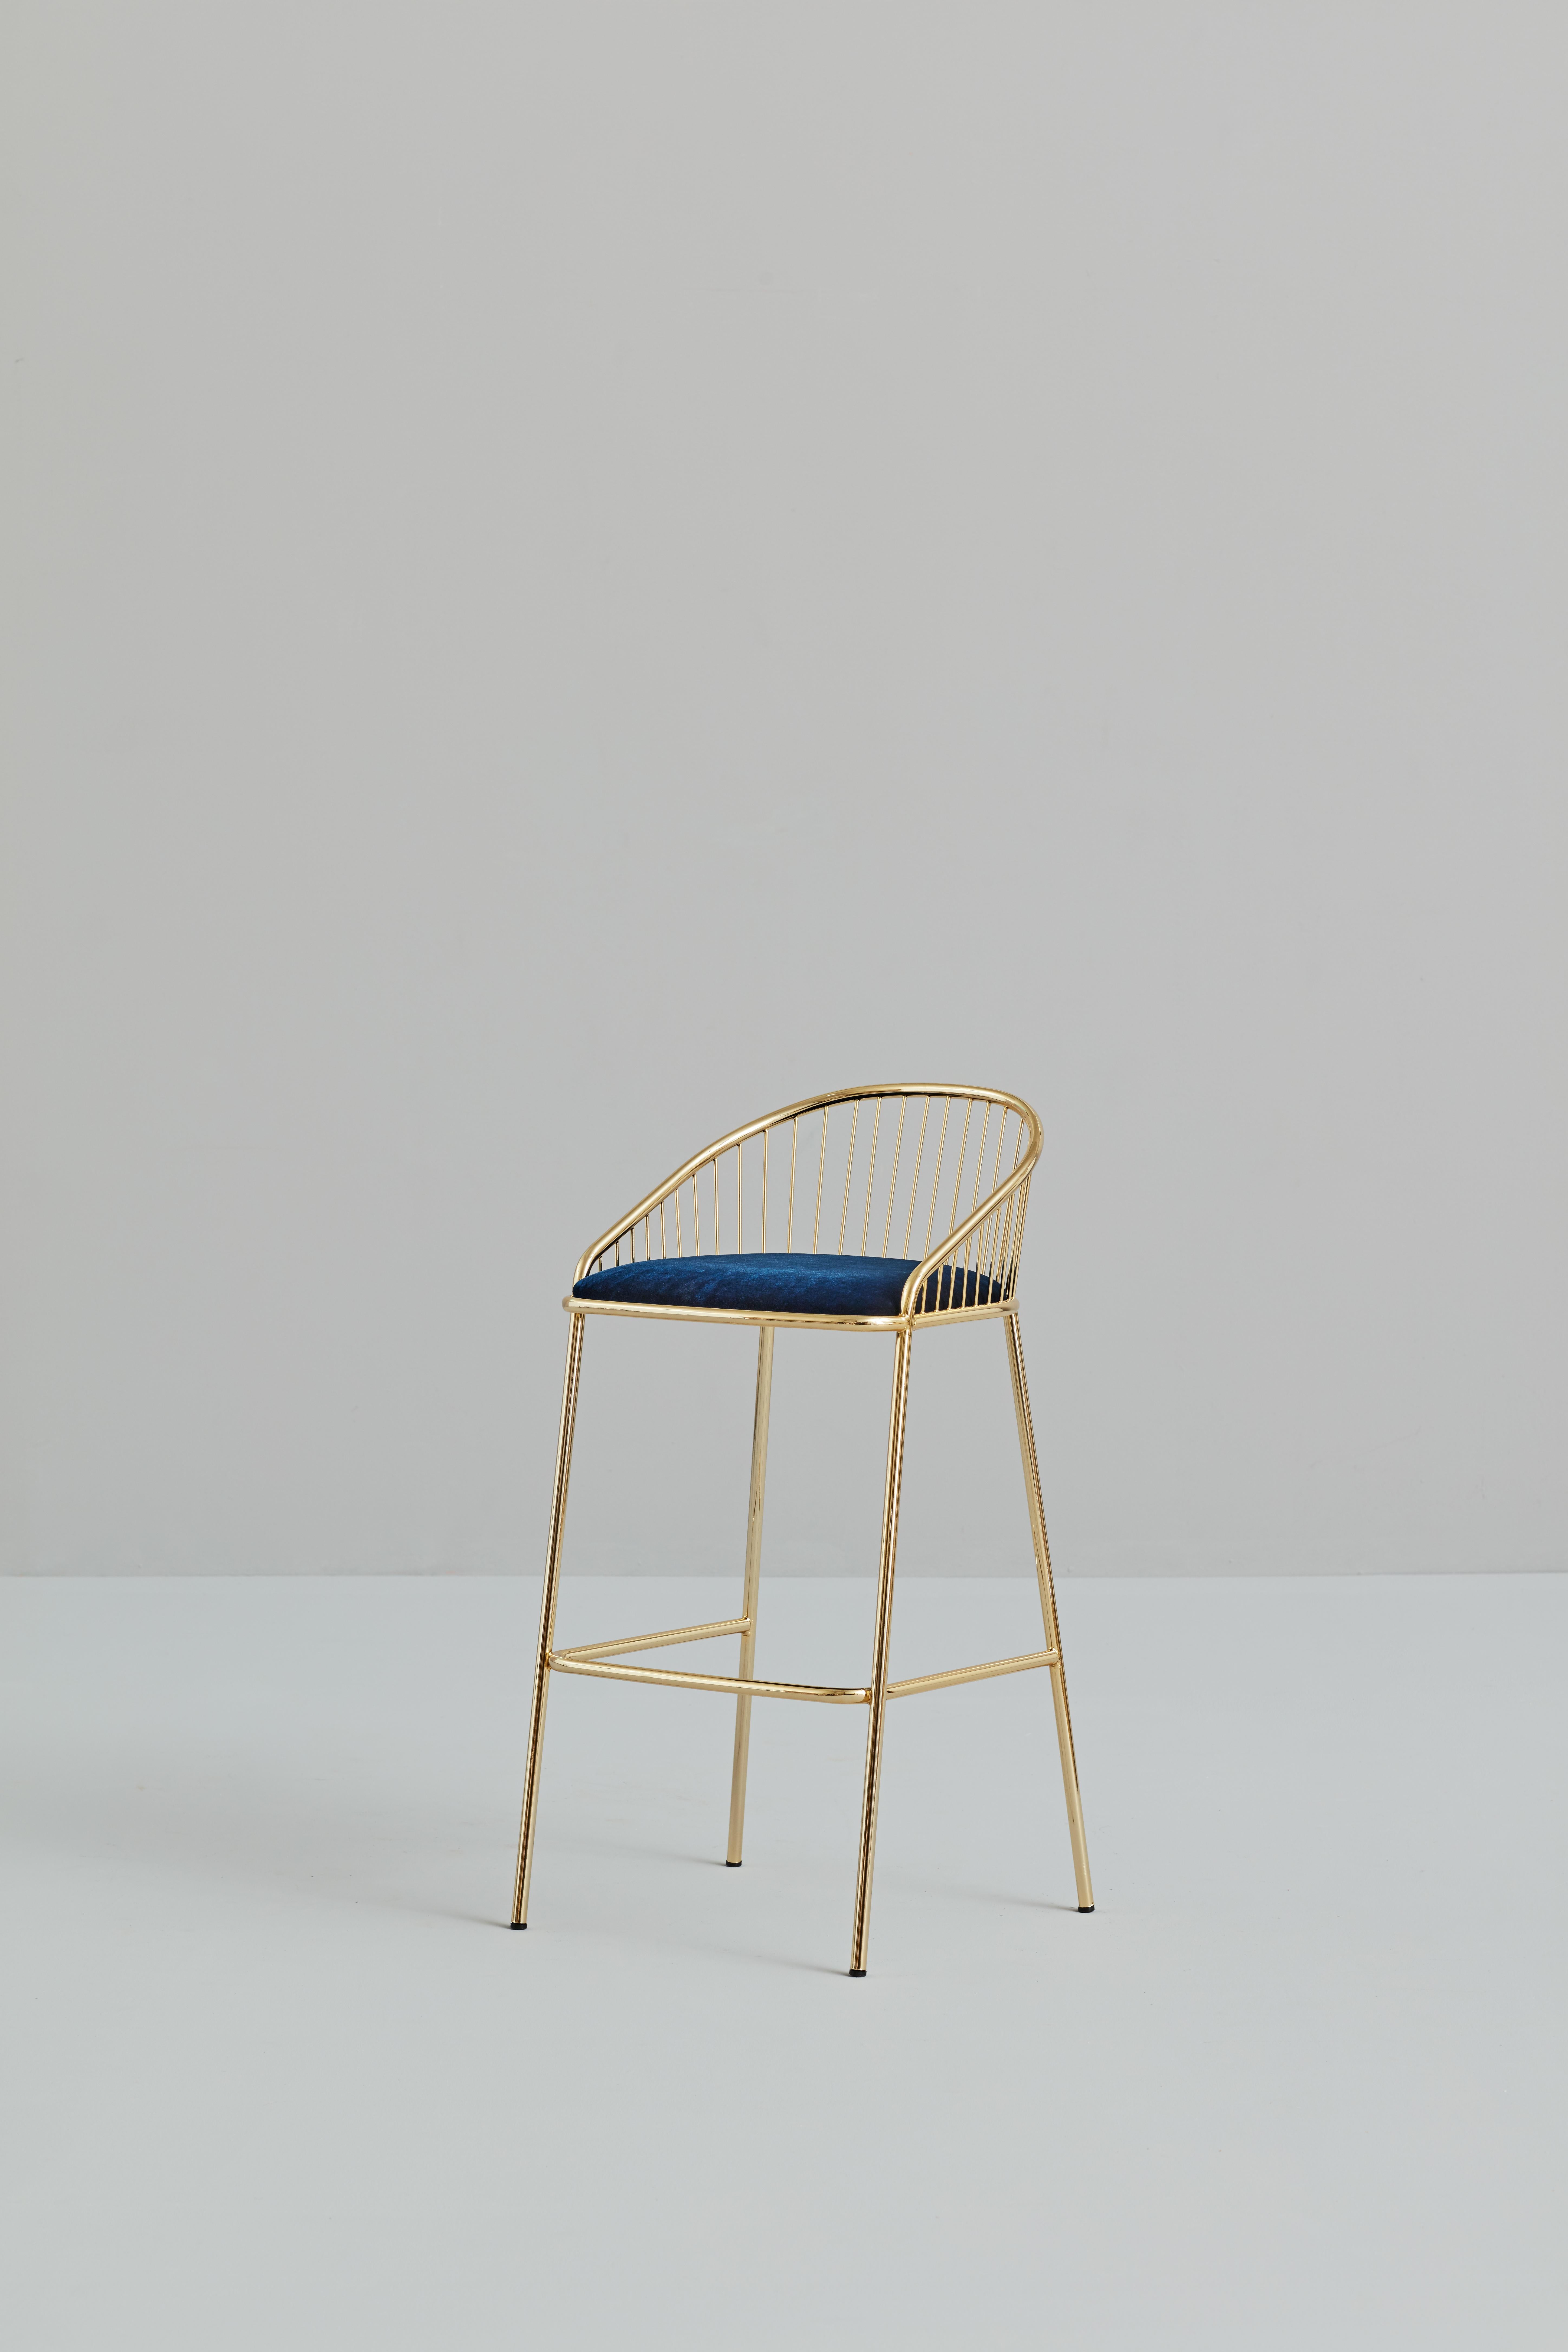 Agora Collection, gold bar stool

Agora is a fresh take on wire chairs designed by Pepe Albargues. It exquisitely combines vintage and modern lines offering a light, contemporary and minimal design that mainly brings the attention to its backrest.